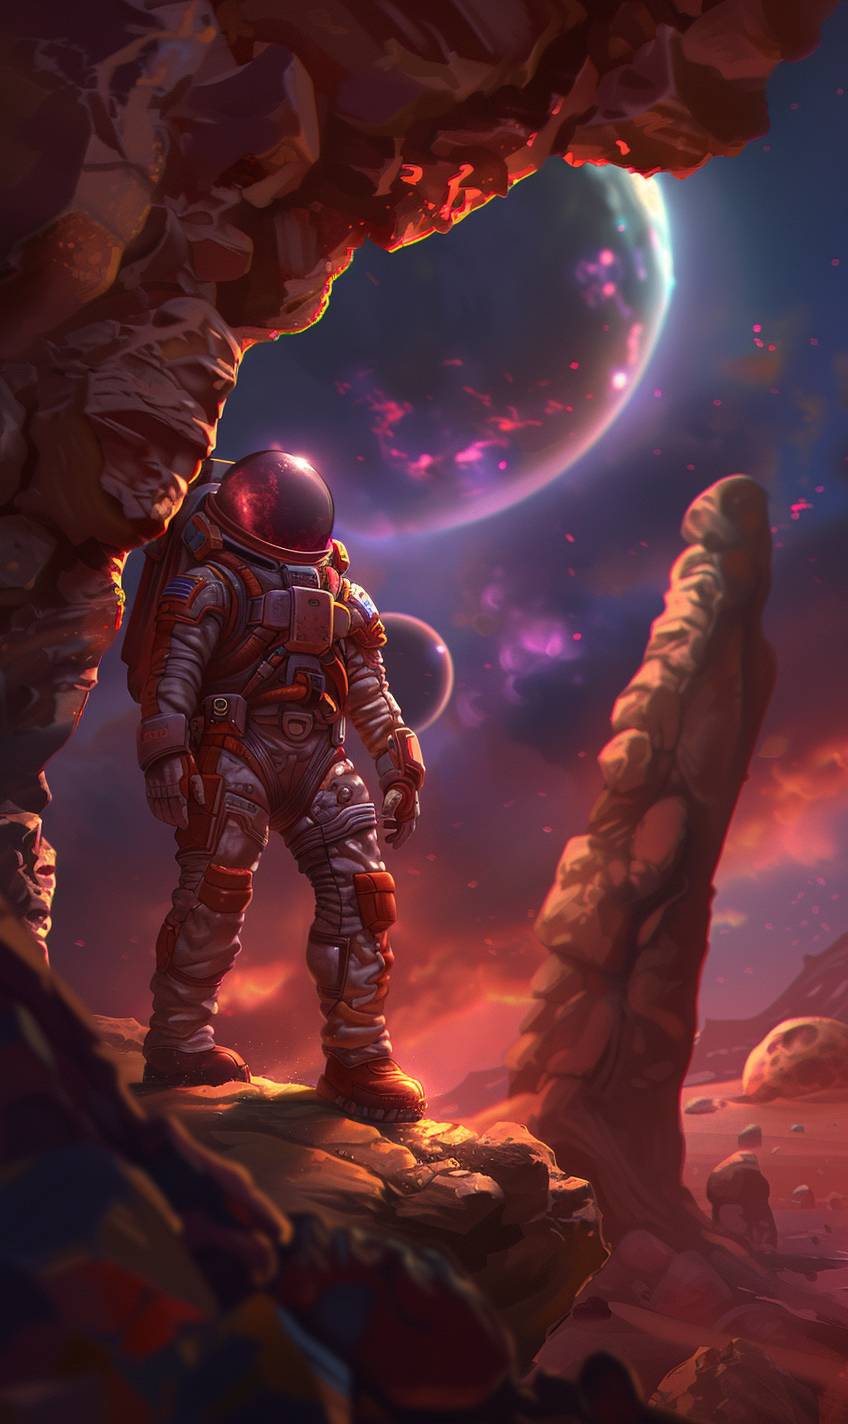 Astronaut exploring a distant planet, alien landscape with strange rock formations, a distant galaxy visible in the sky, high-tech suit